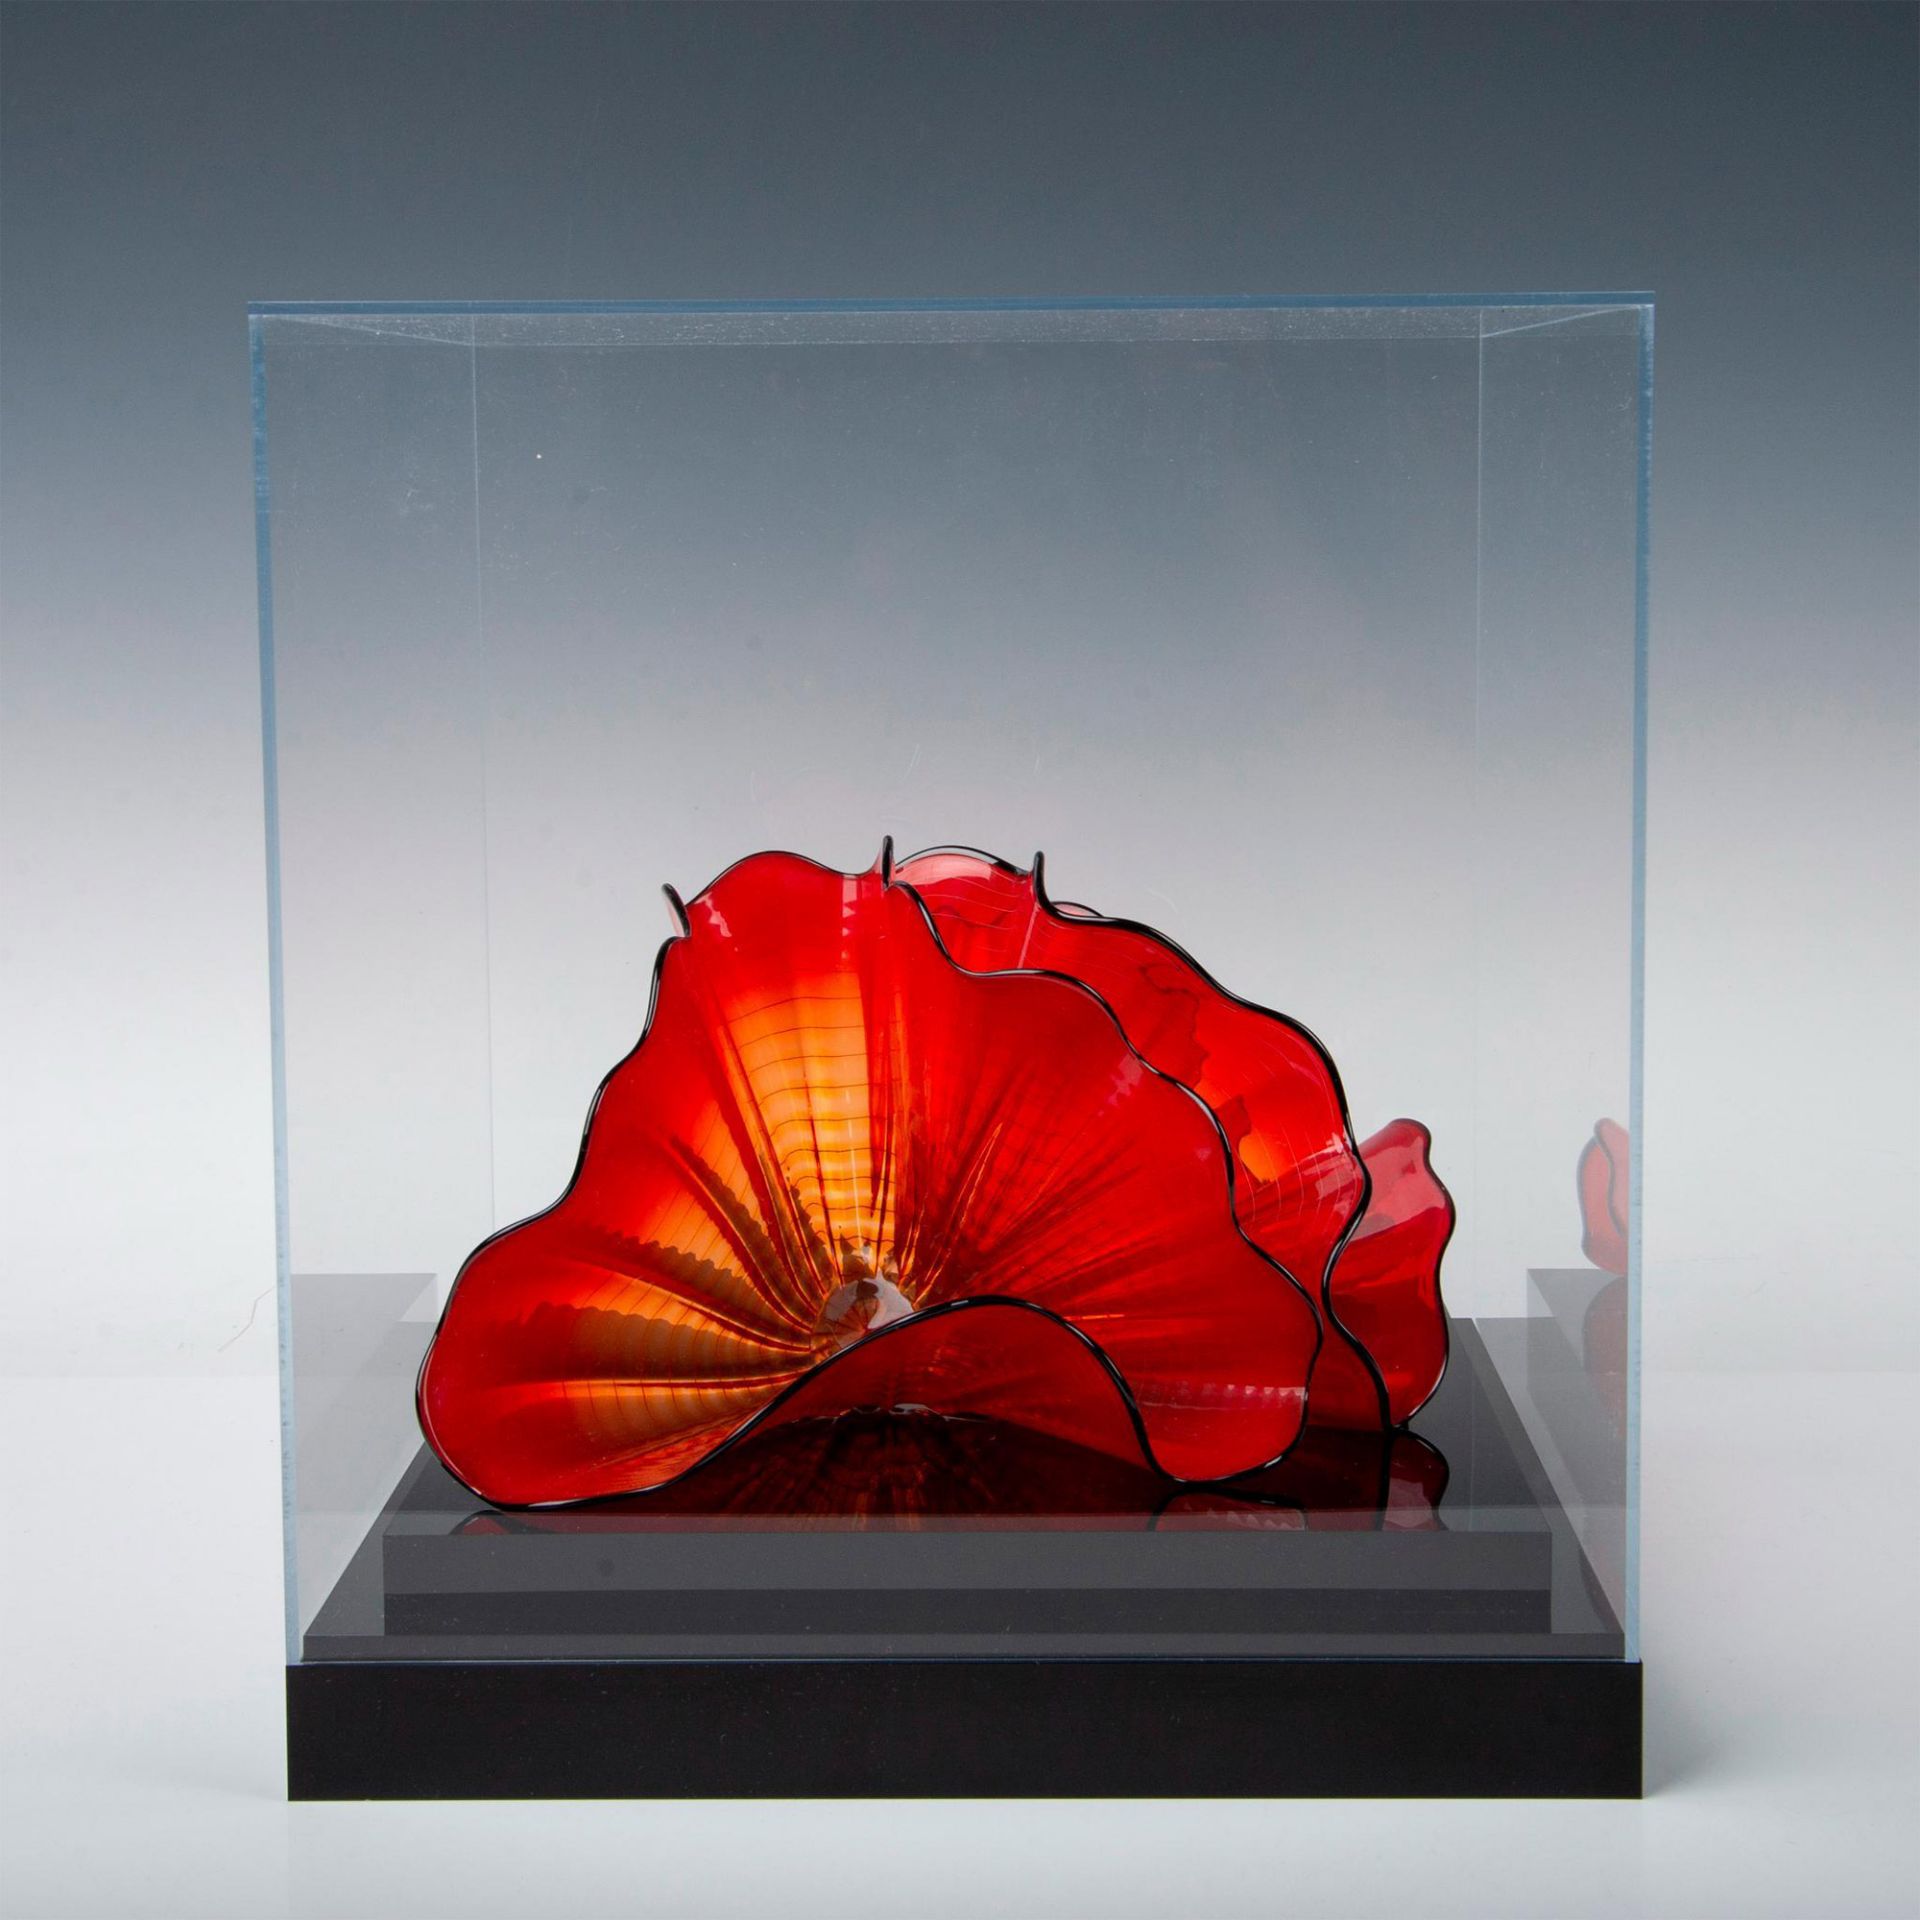 Dale Chihuly Portland Press Art Glass, Red Amber Persian Pair - Image 3 of 20